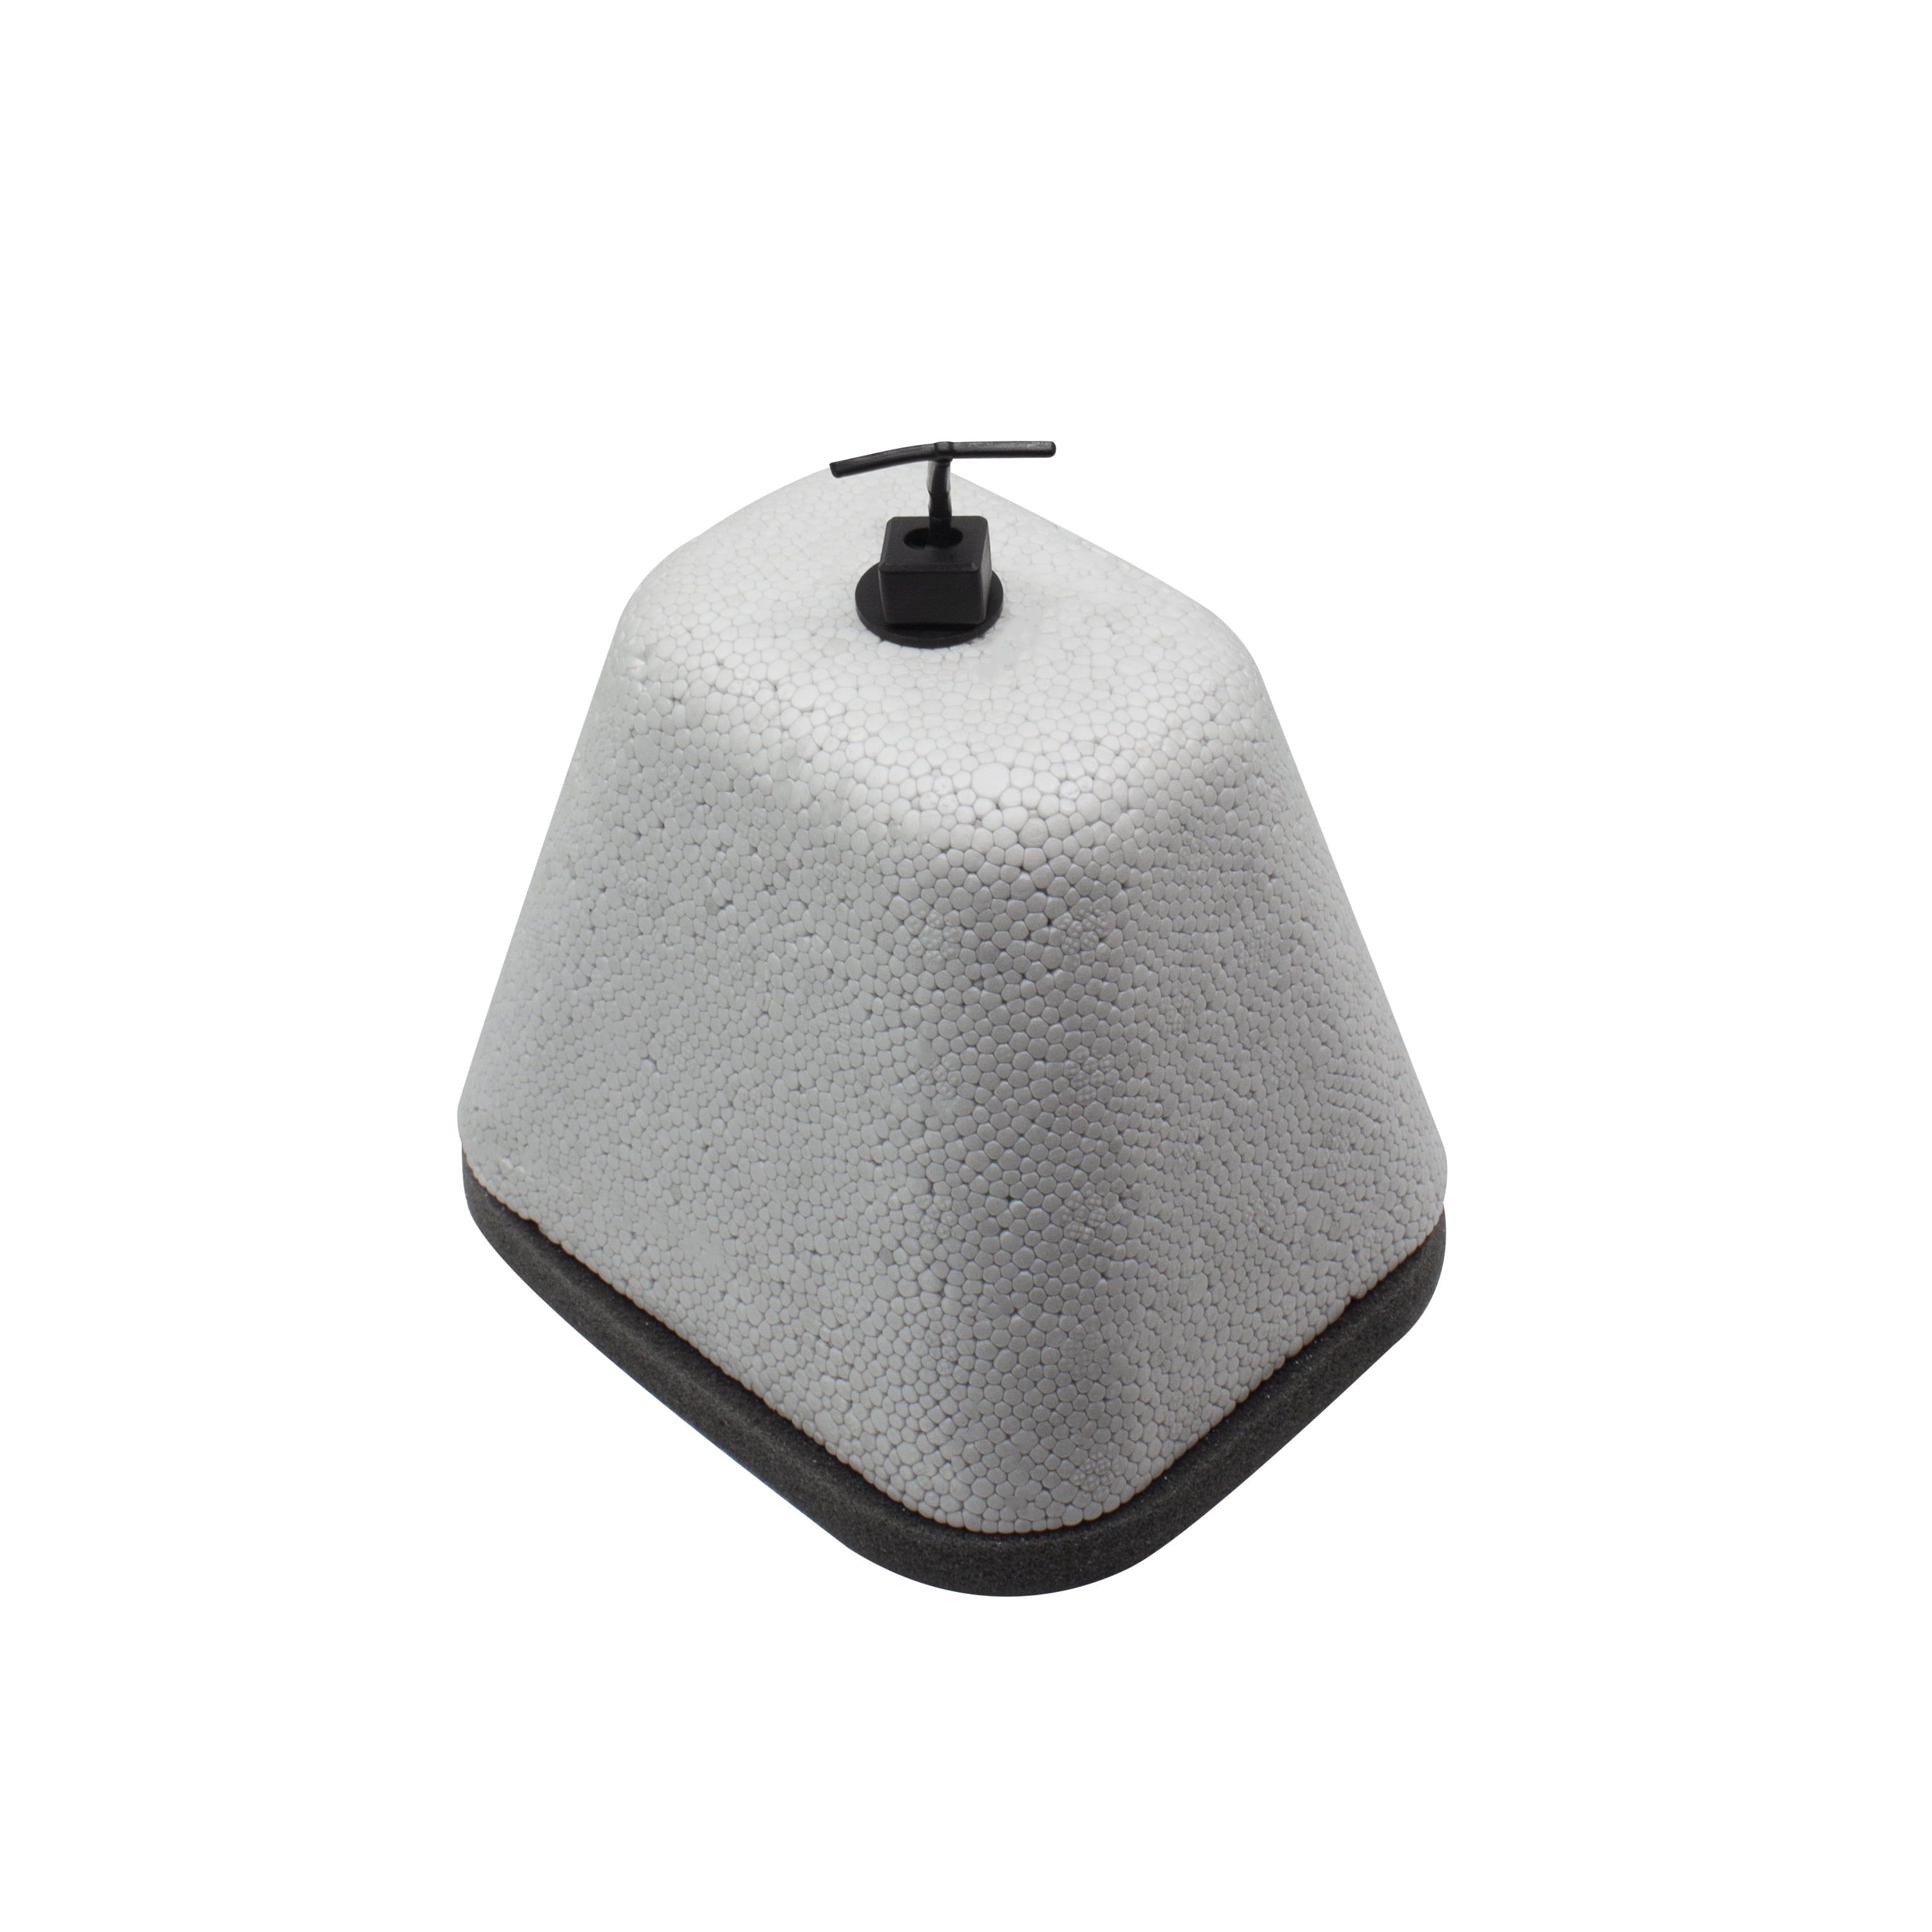 Frost King Foam Faucet Cover Protector